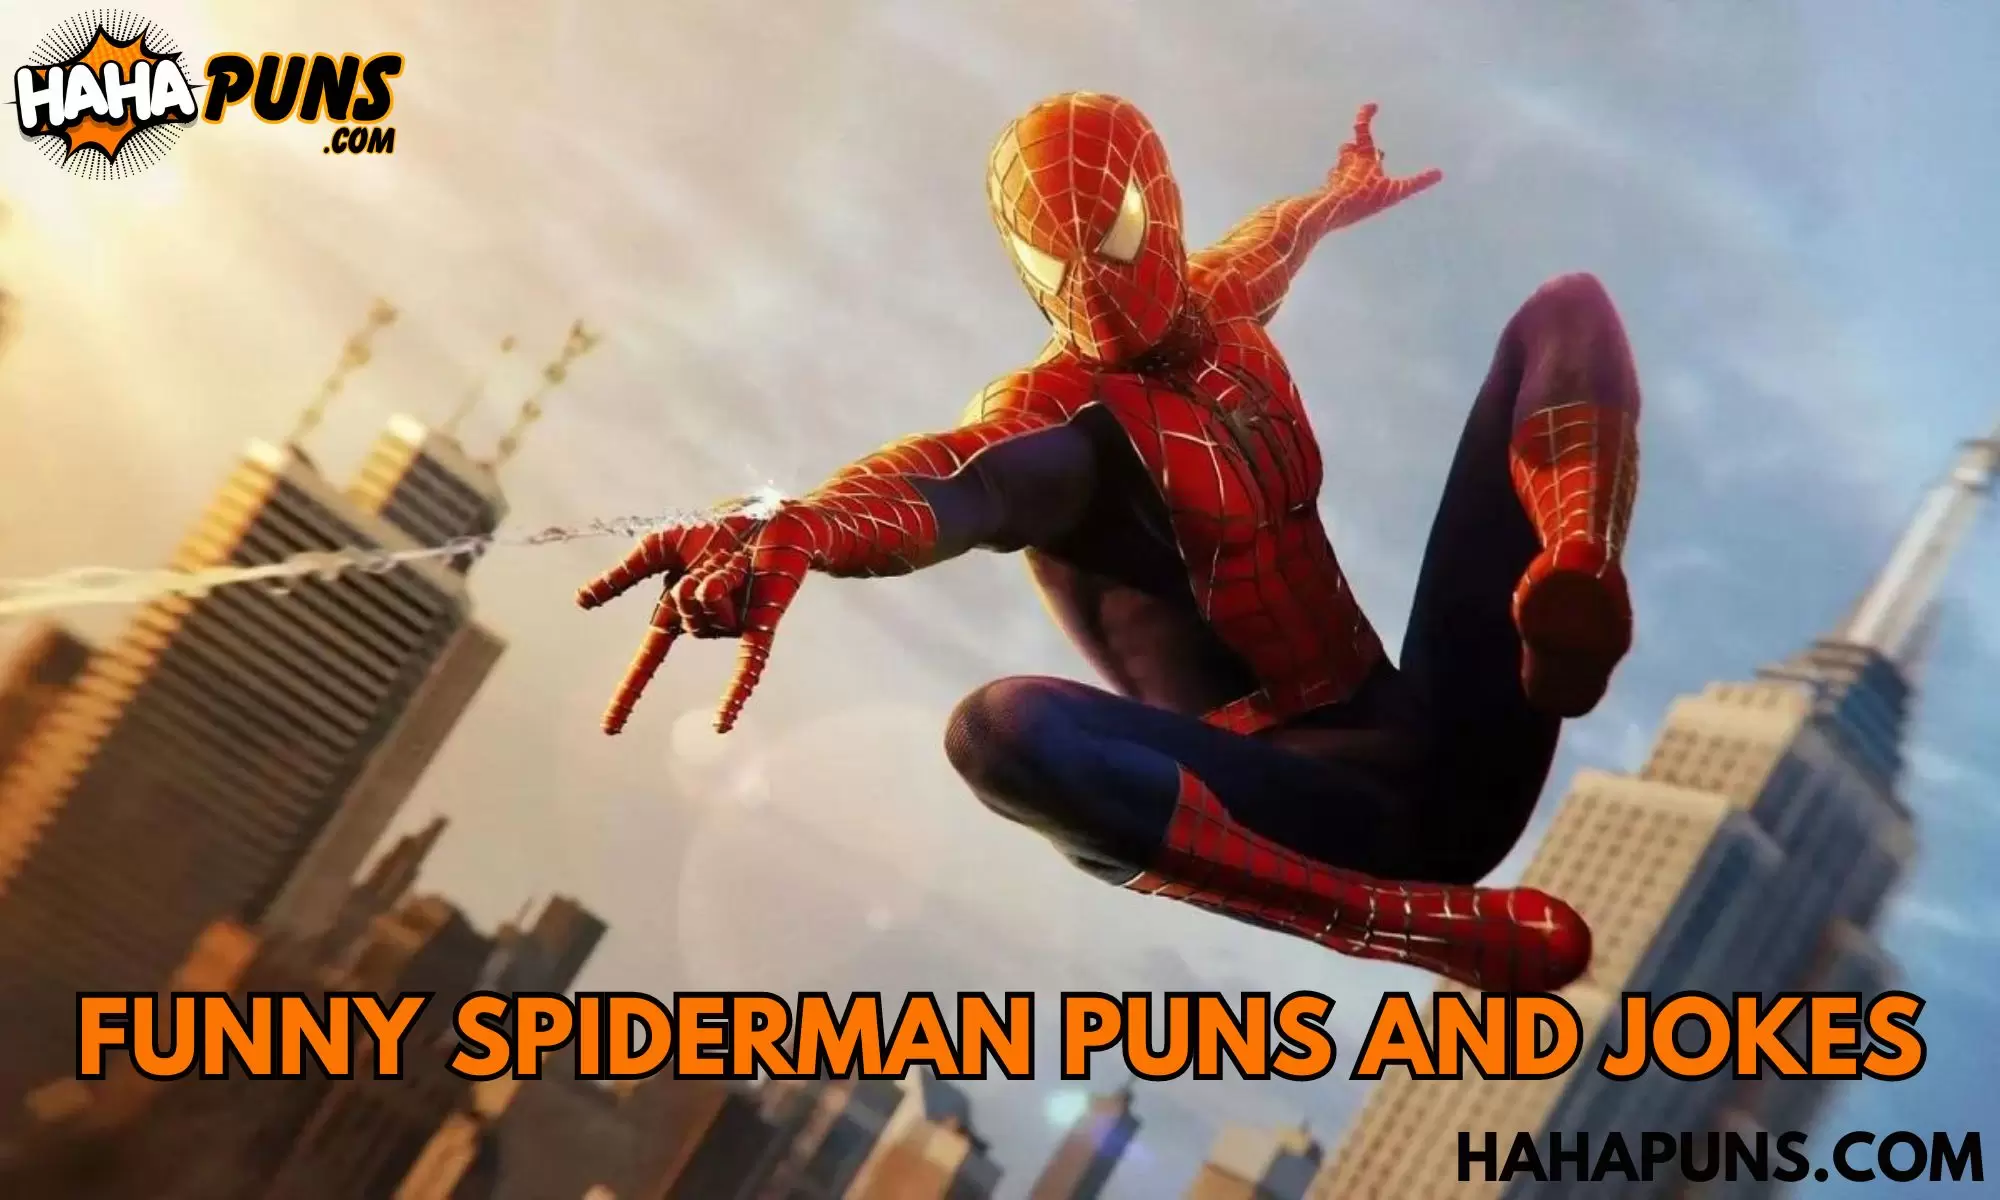 Funny Spiderman Puns And Jokes